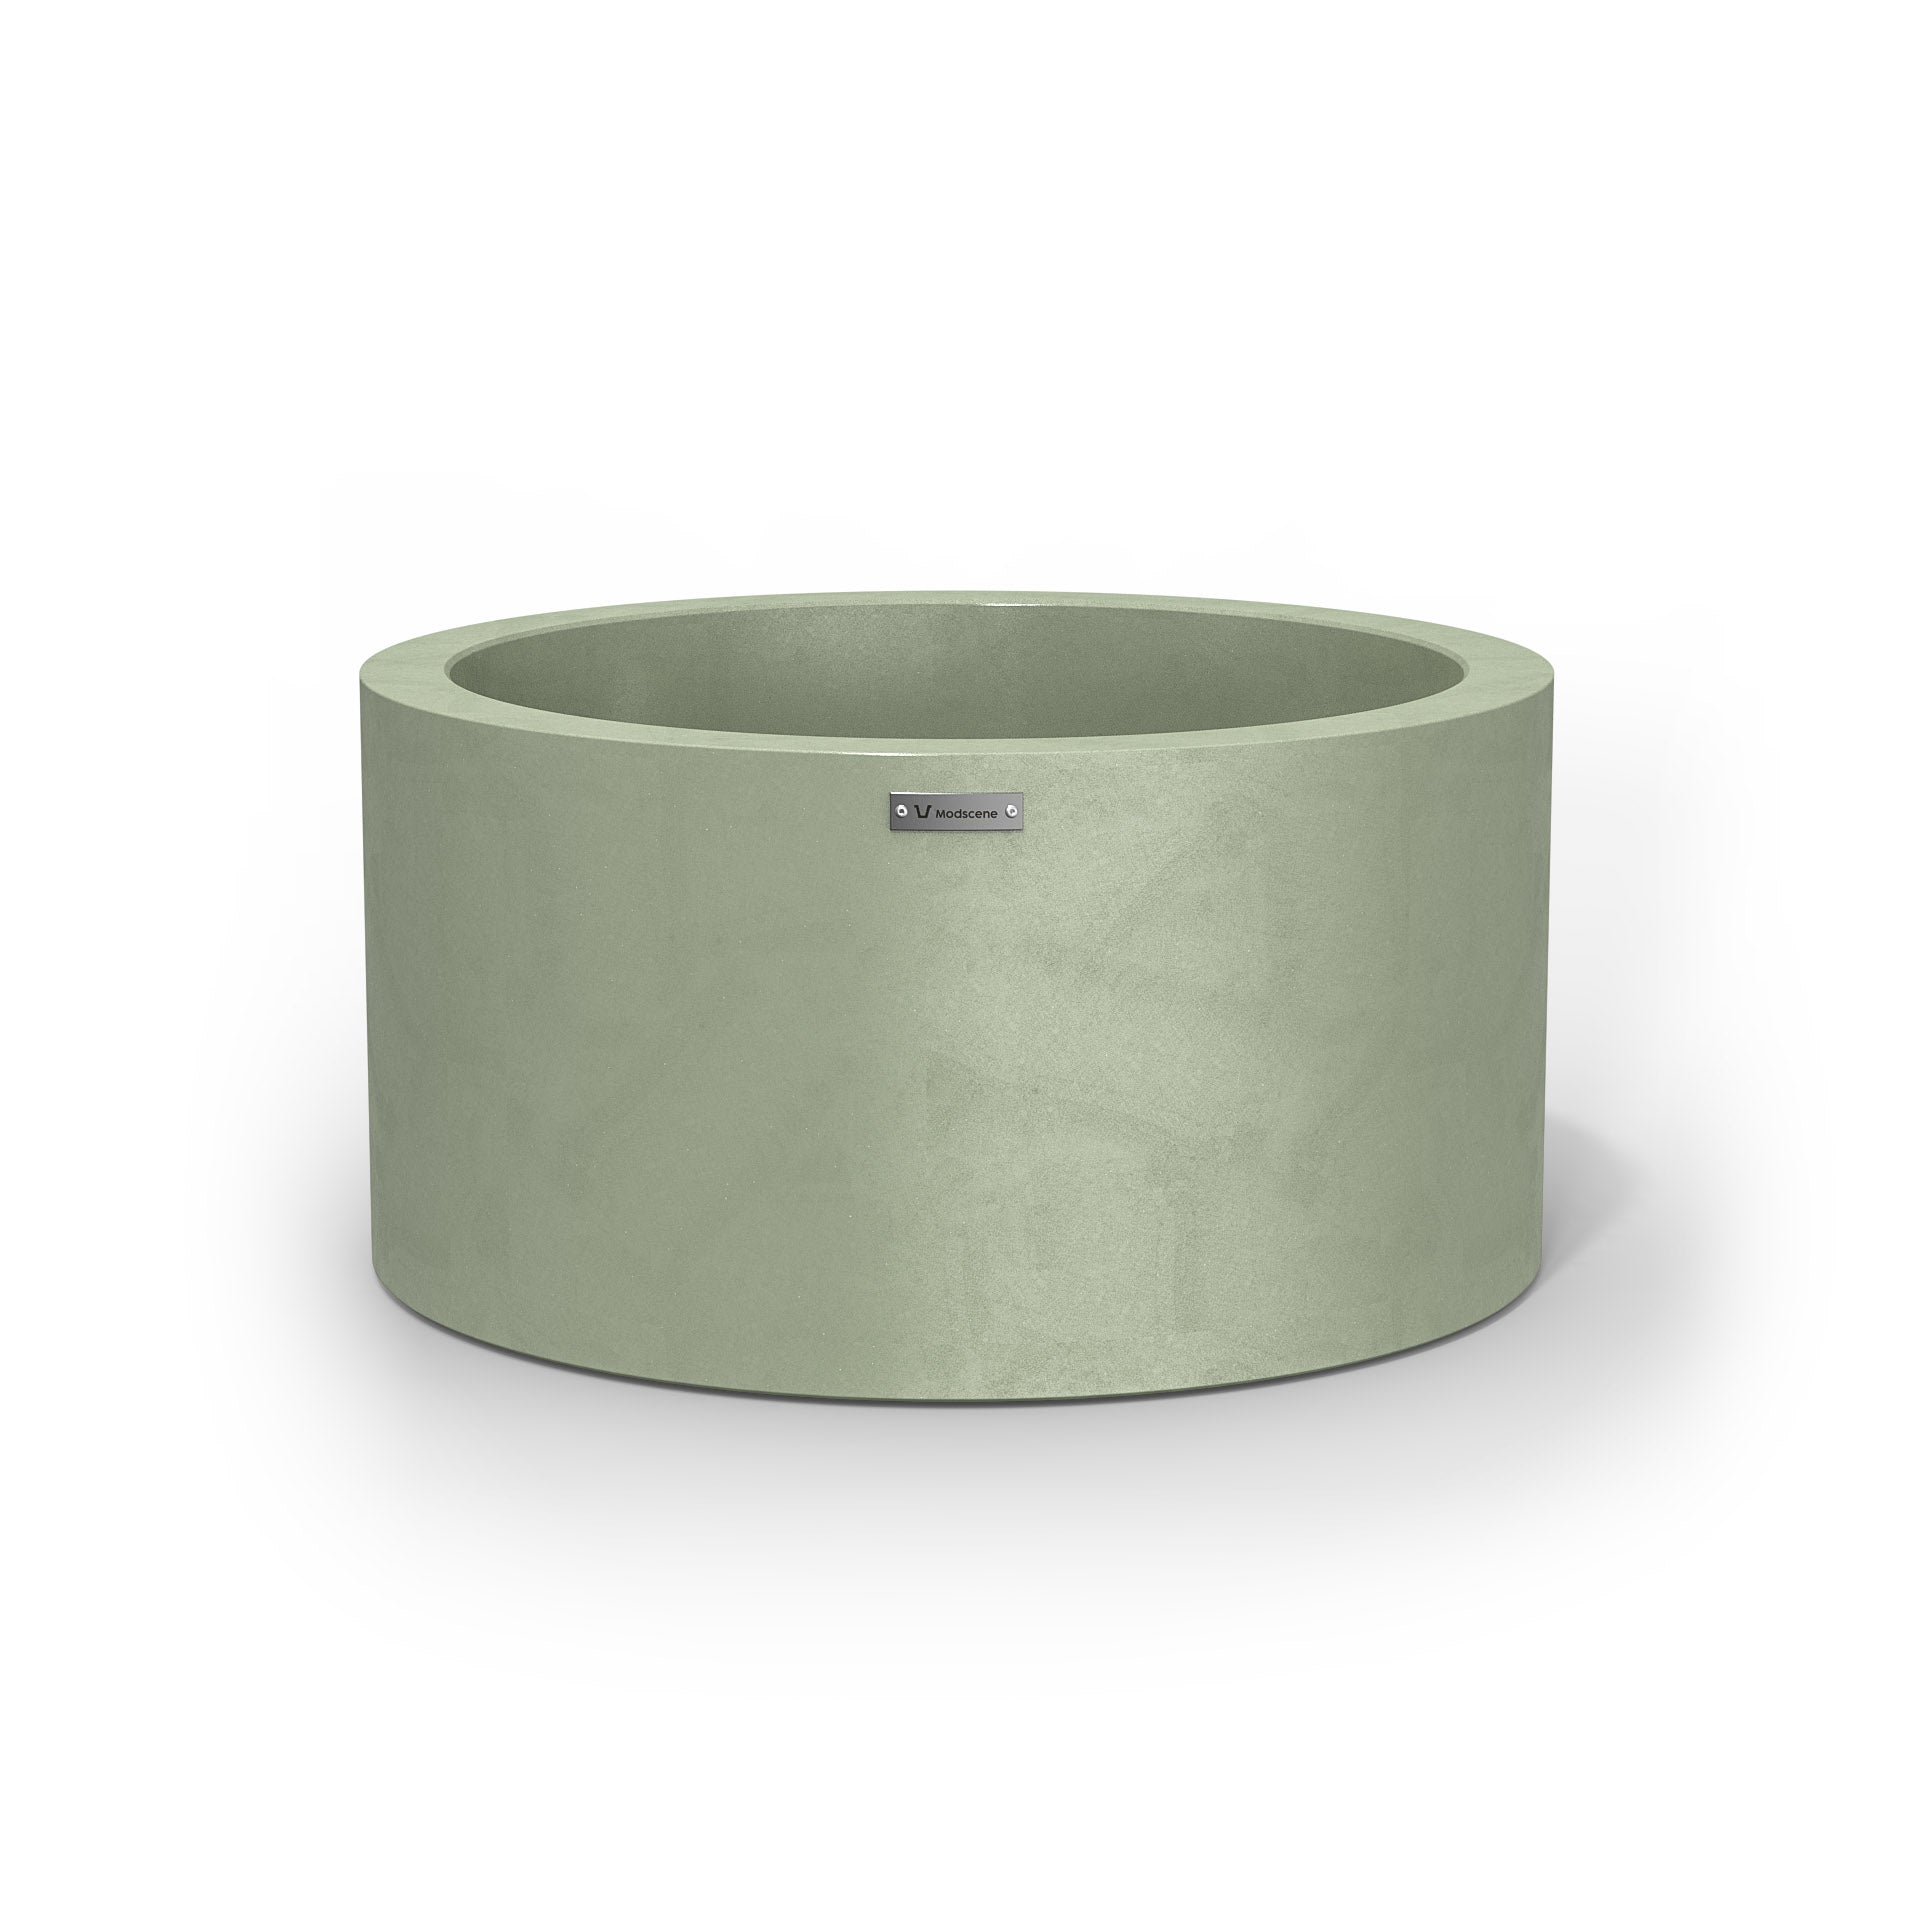 A medium cylinder shaped pot planter in moss green with a concrete look finish.